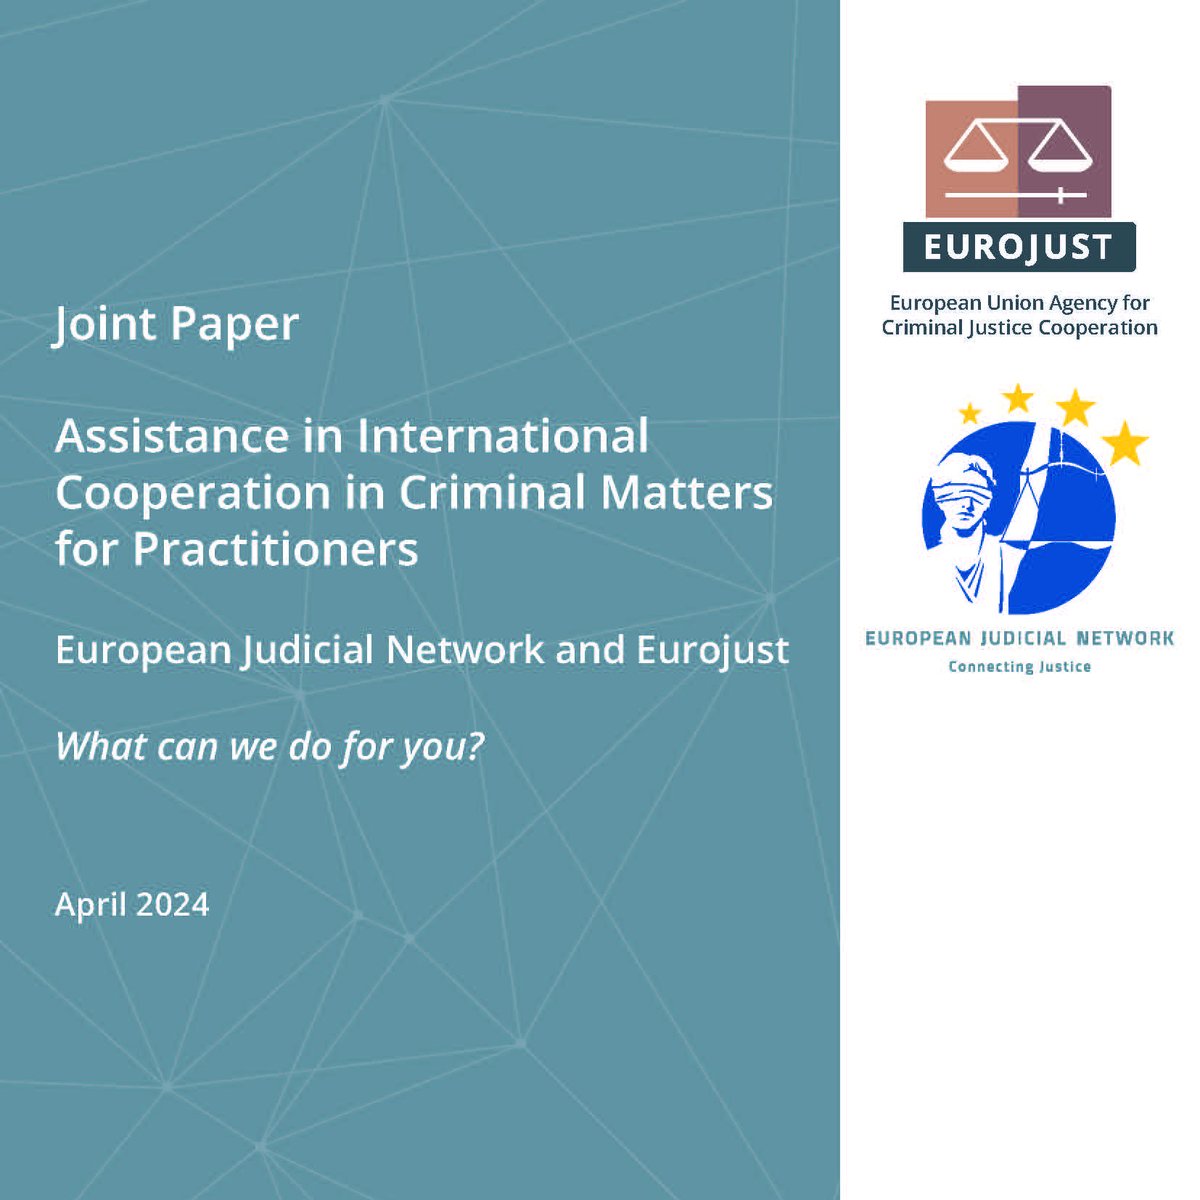 🤝 Direct contact between national judicial authorities can make or break a cross-border case. ⚖️ Luckily #Eurojust & the European Judicial Network #EJN are here to help. 📘 Check out our recently updated paper to find out how we support practitioners 👇 eurojust.europa.eu/publication/jo…